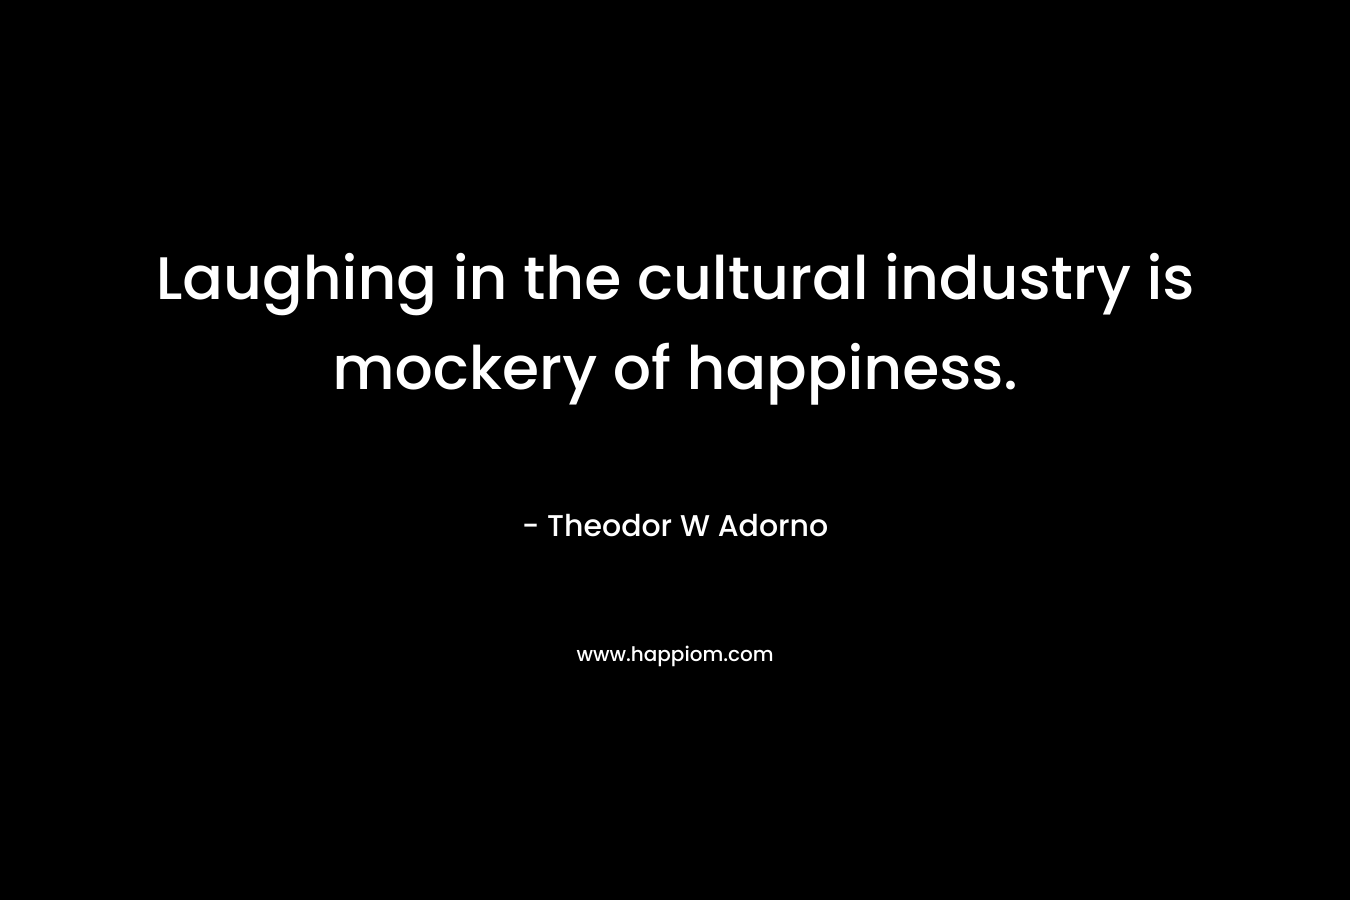 Laughing in the cultural industry is mockery of happiness. – Theodor W Adorno